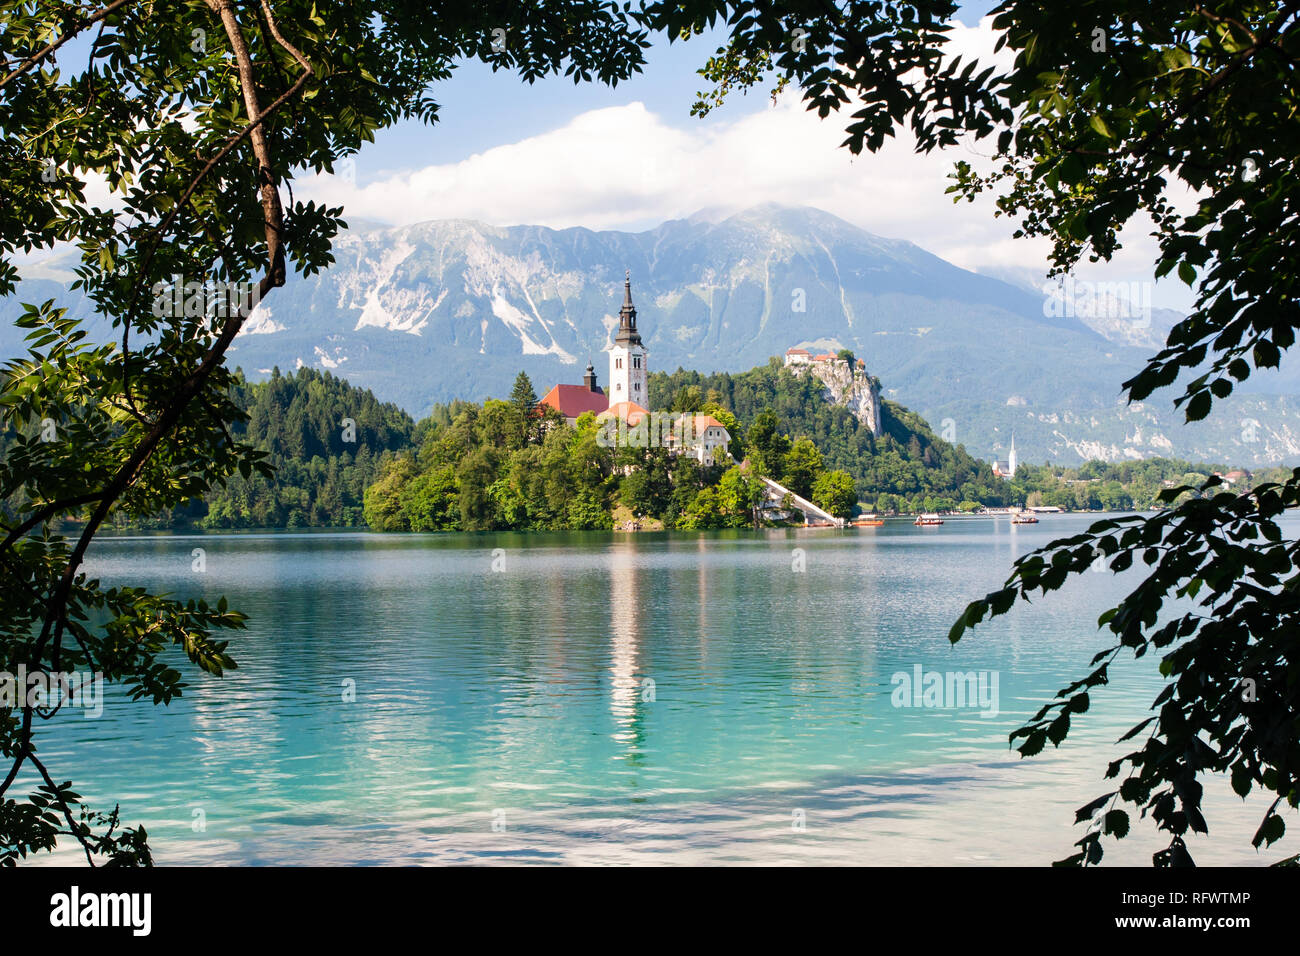 Tiny island with a church, a castle on a crag, and mountain views, Lake Bled, Slovenia, Europe Stock Photo